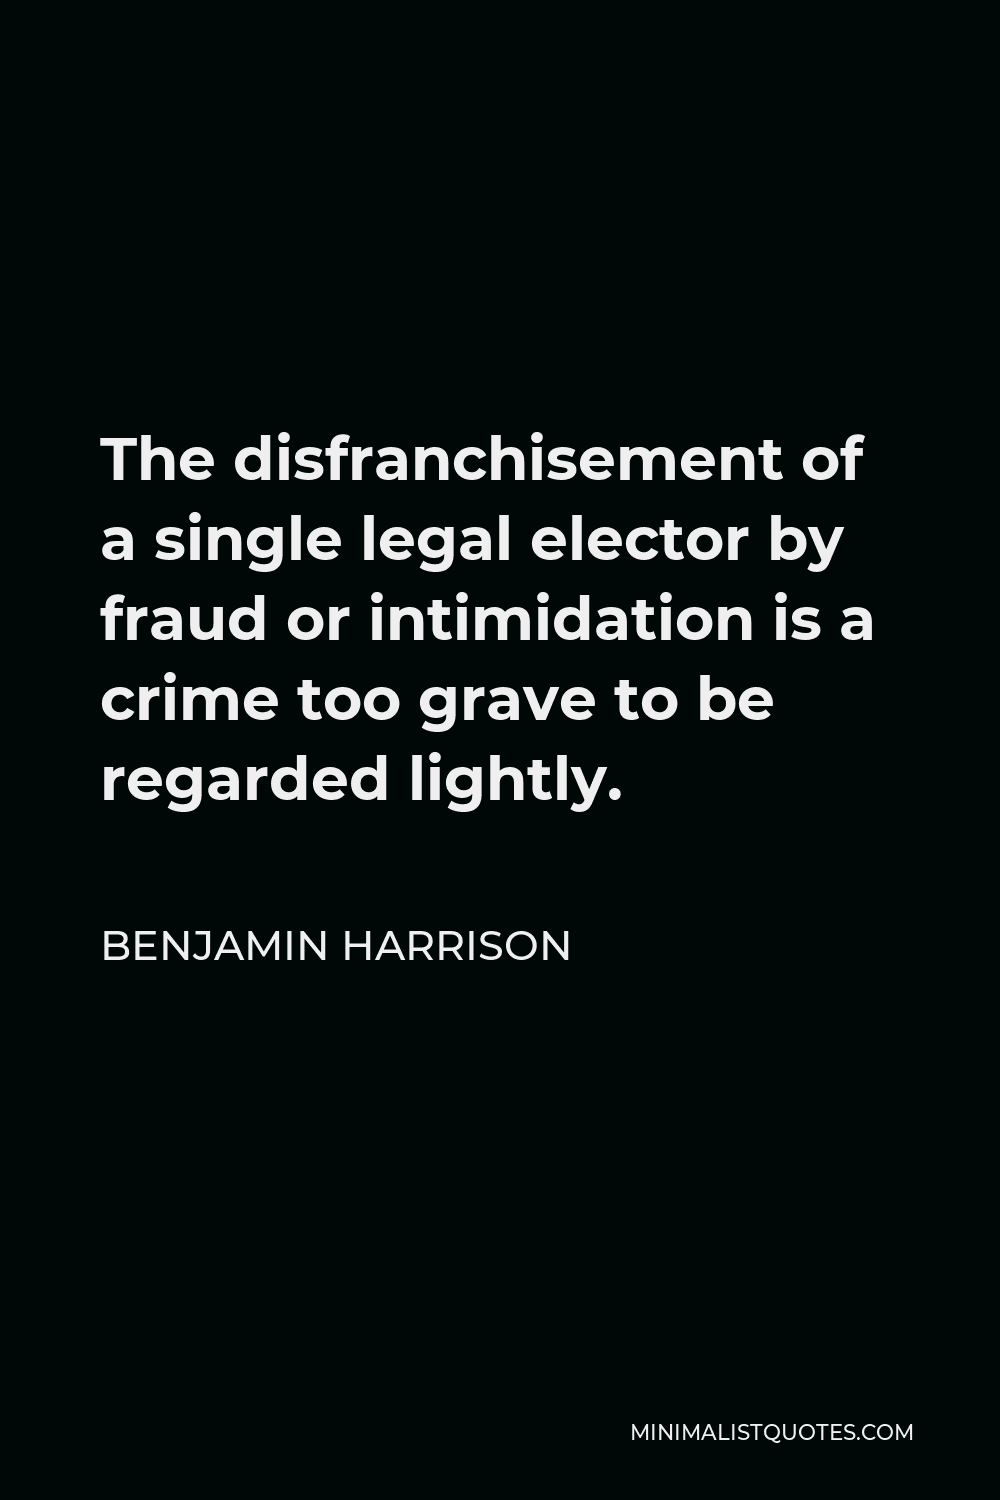 Benjamin Harrison Quote - The disfranchisement of a single legal elector by fraud or intimidation is a crime too grave to be regarded lightly.